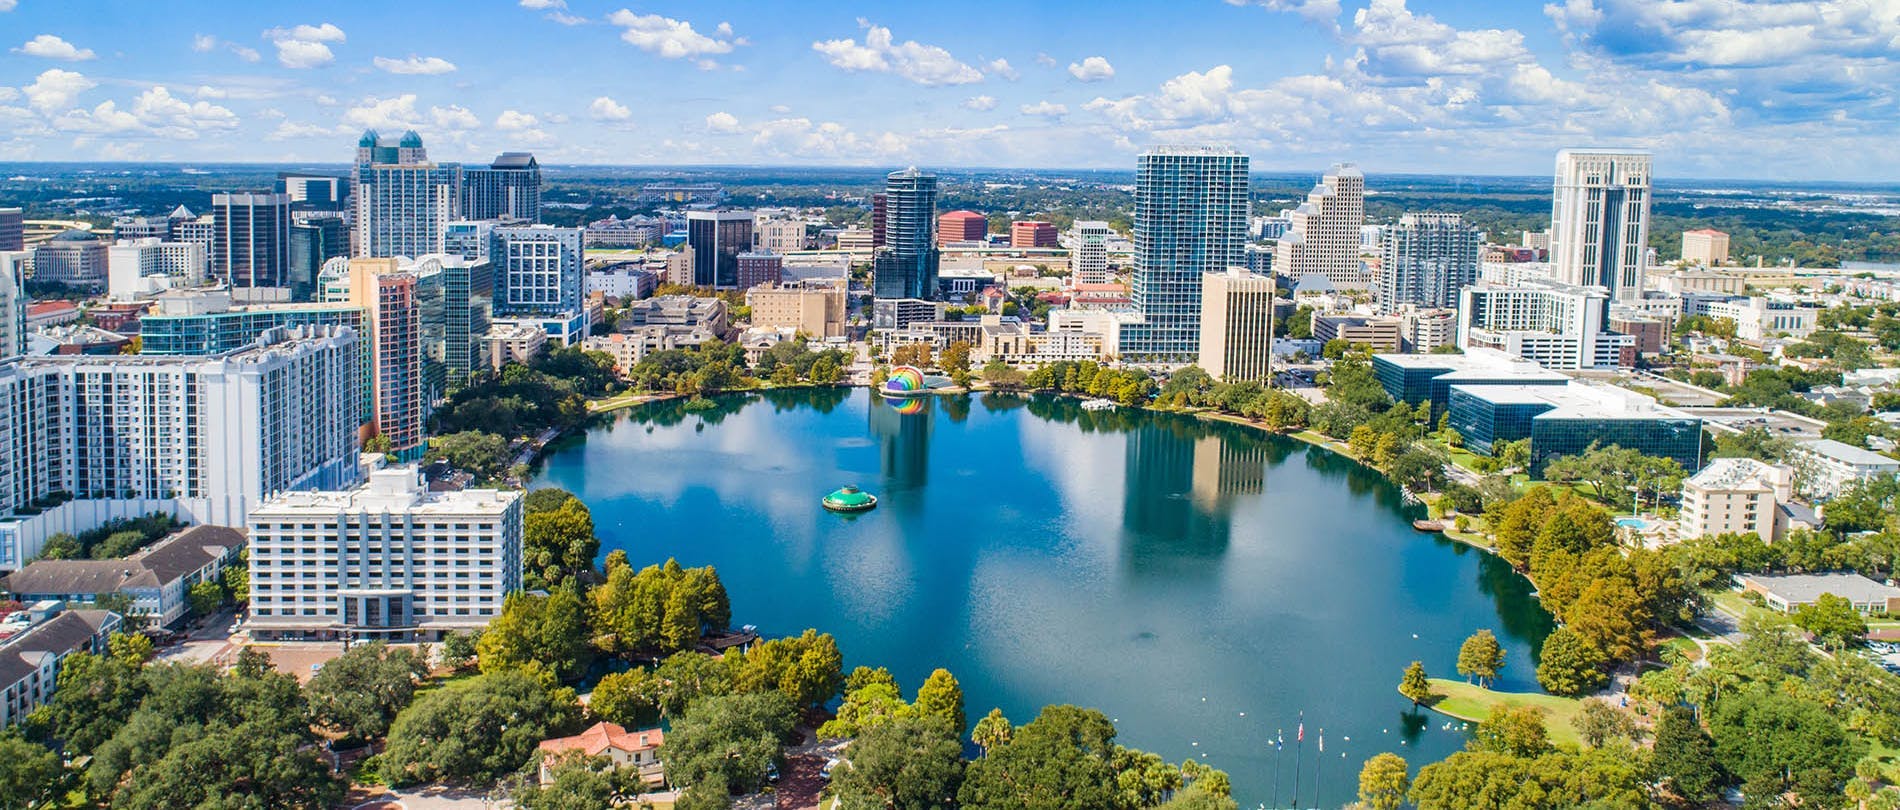 A Wild Ride Though Orlando Water Quality: Should You Drink It?